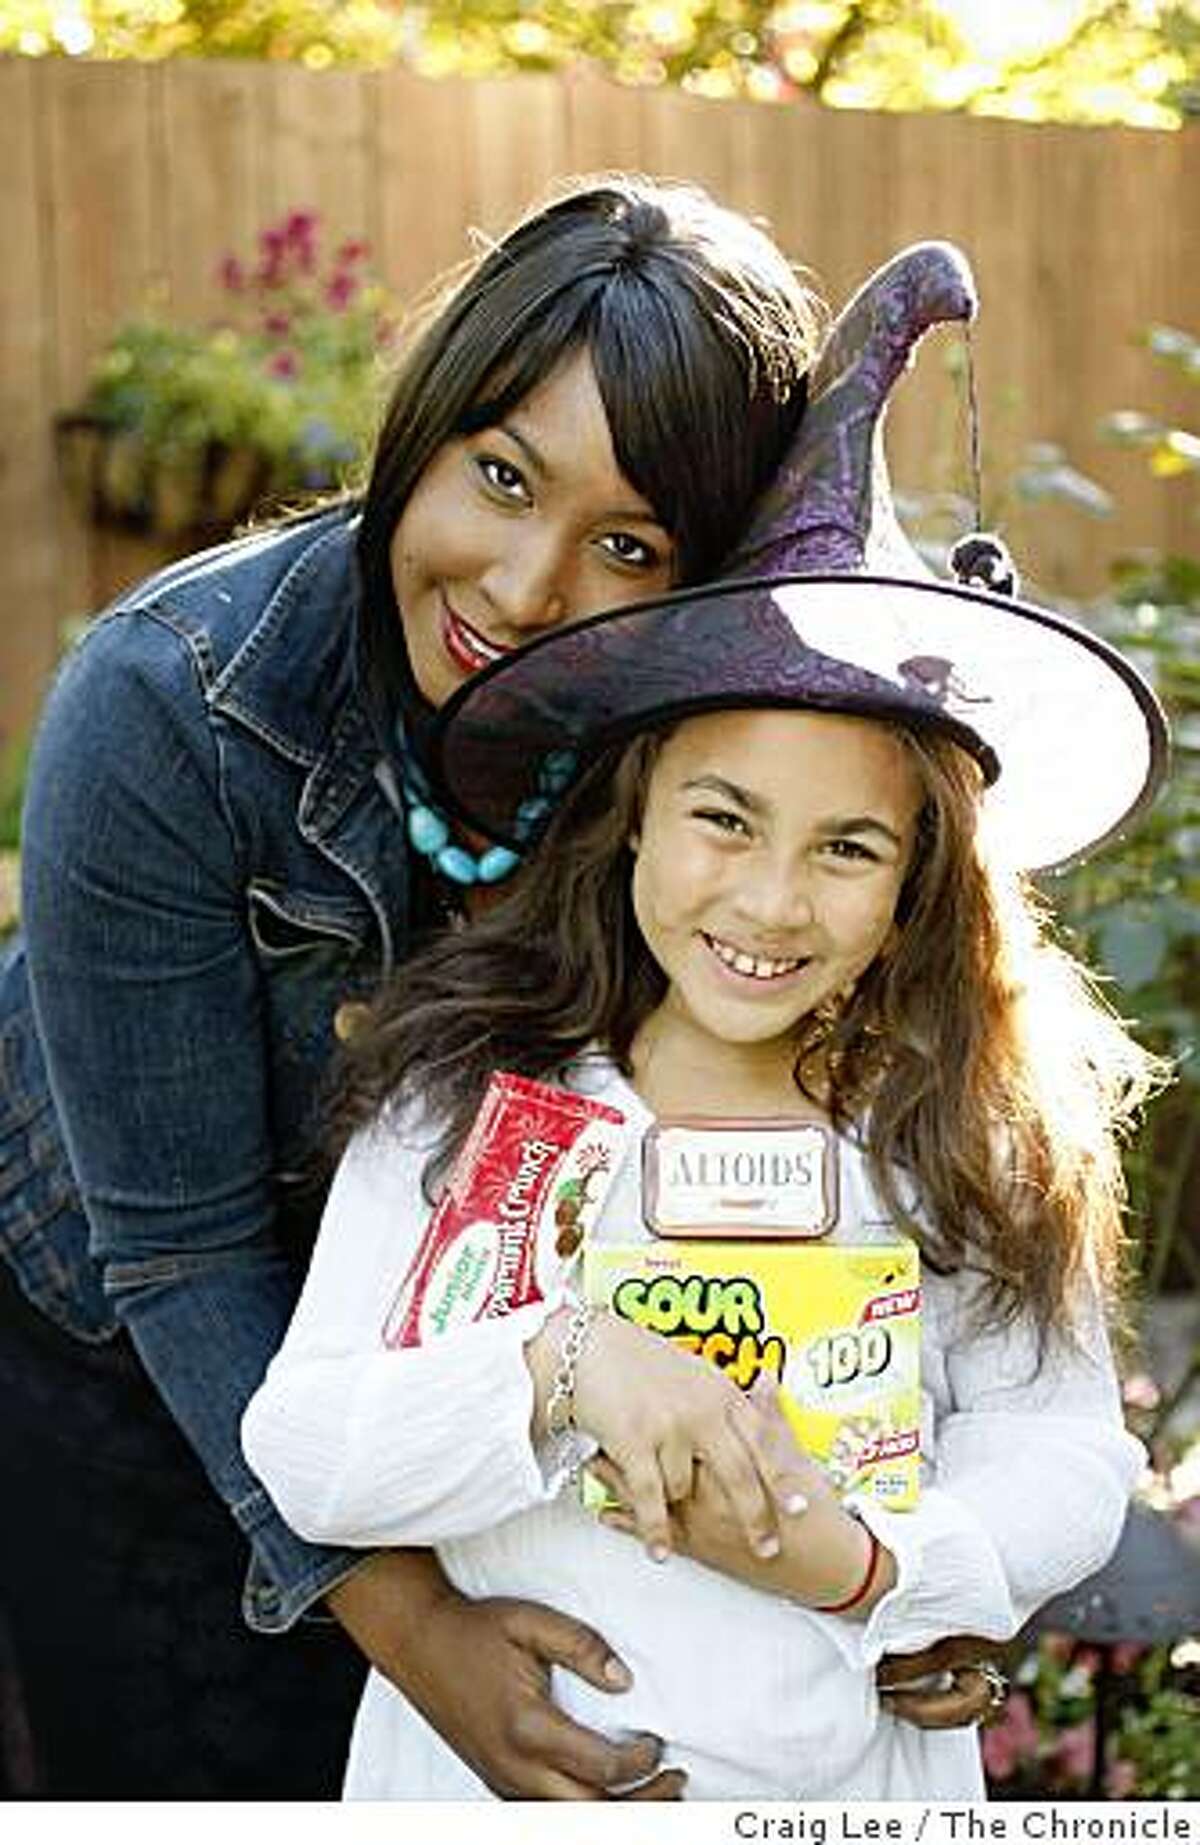 Mireille Schwartz and her 8-year-old daughter, Charlotte Jude, who is allergic to nuts, are preparing for Halloween nut-free trick or treat for her daughter, in San Francisco, Calif., on October 21, 2008. She is holding some nut-free treats.